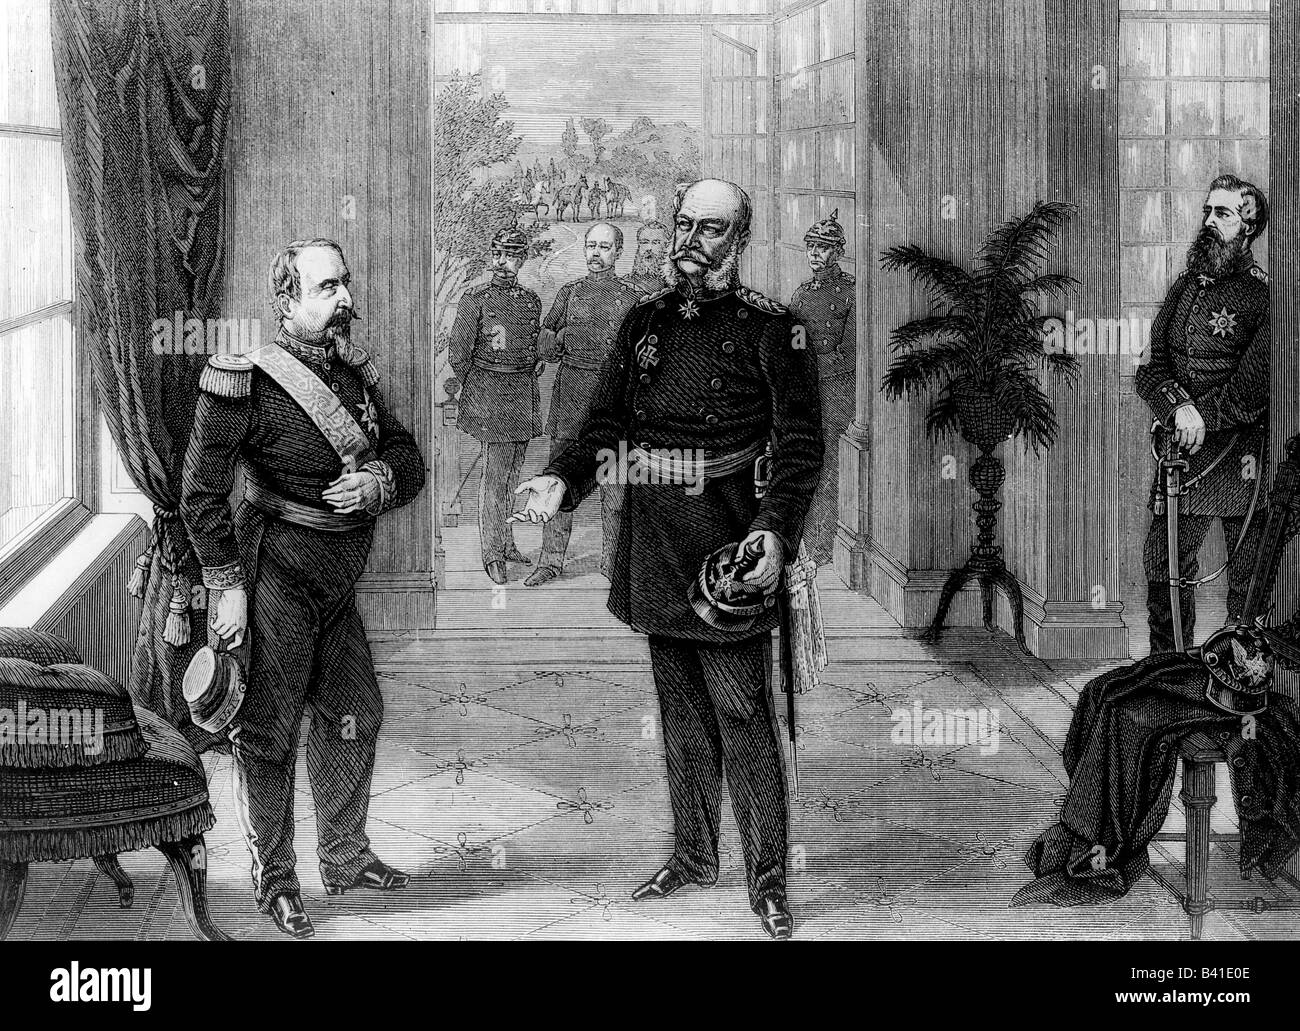 Napoleon III, 20.4.1808 - 9.1.1873, Emperor of the French 2.12.1852 - 2.9.1870, meeting with King William I of Prussia, Bellevue castle near Sedan, 2.9.1870, wood engraving, 19th century, , Stock Photo